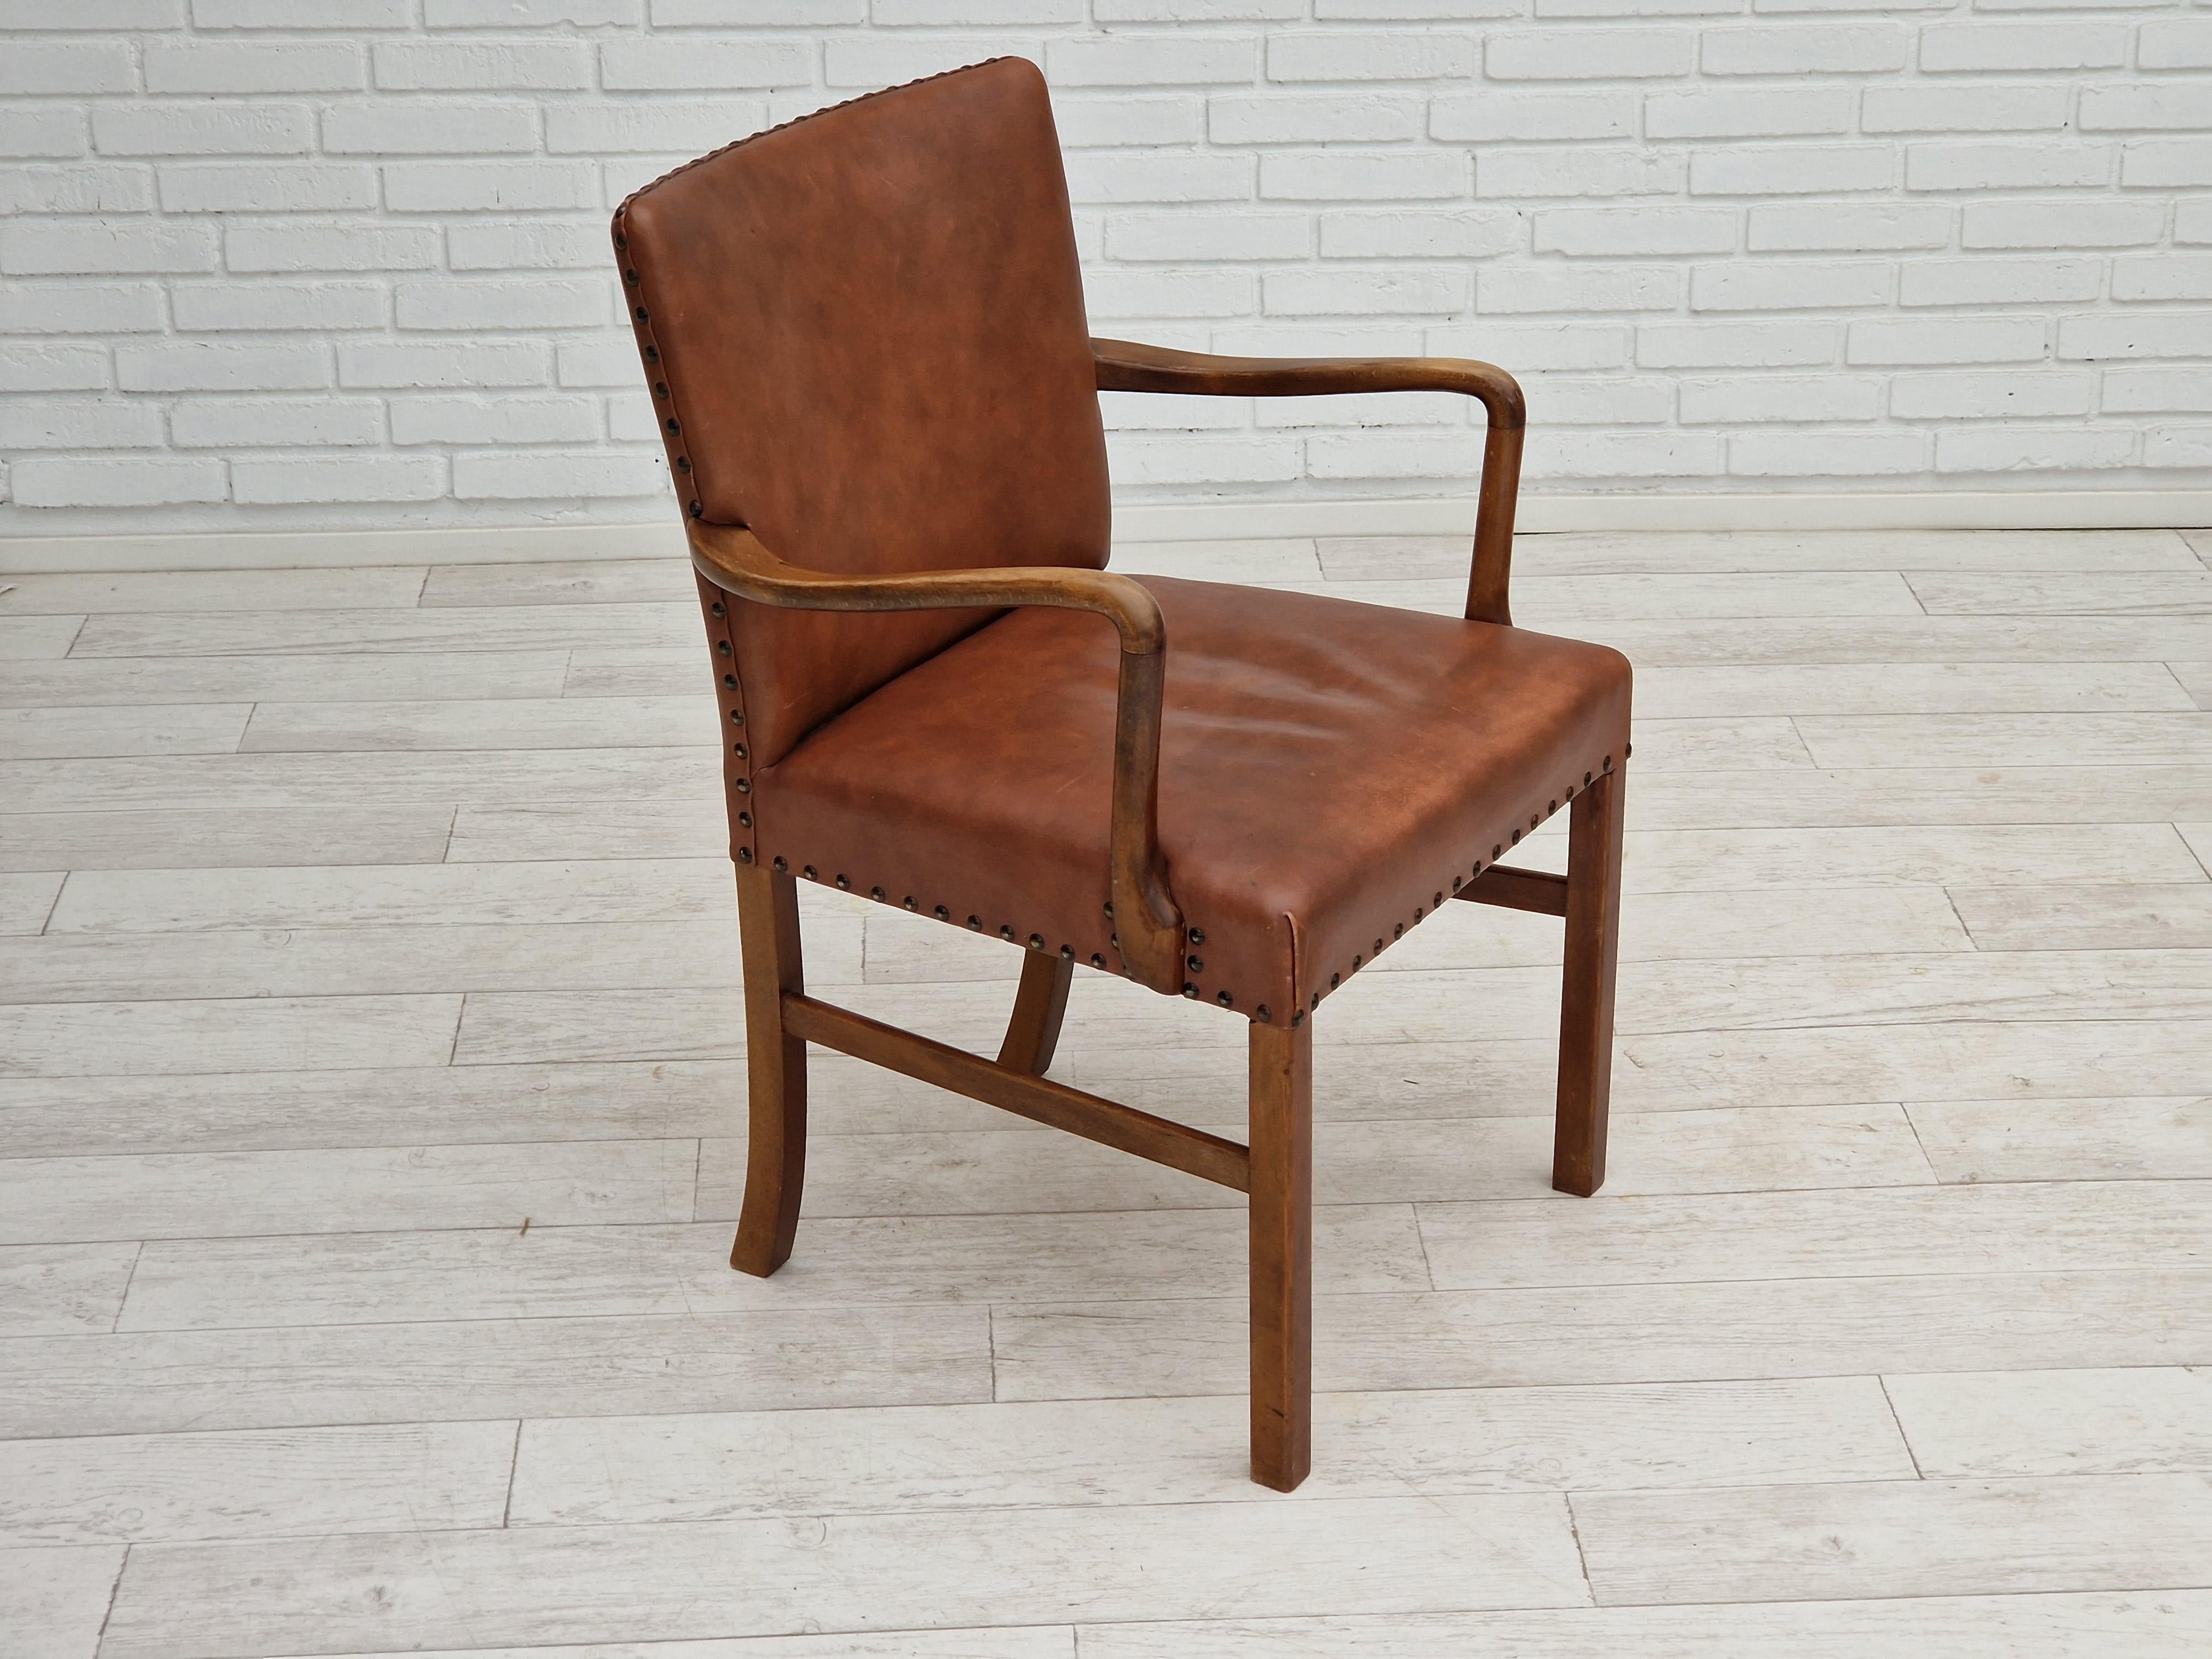 1950s, Danish Vintage Armchair, Original Condition, Leather, Beechwood In Good Condition In Tarm, 82